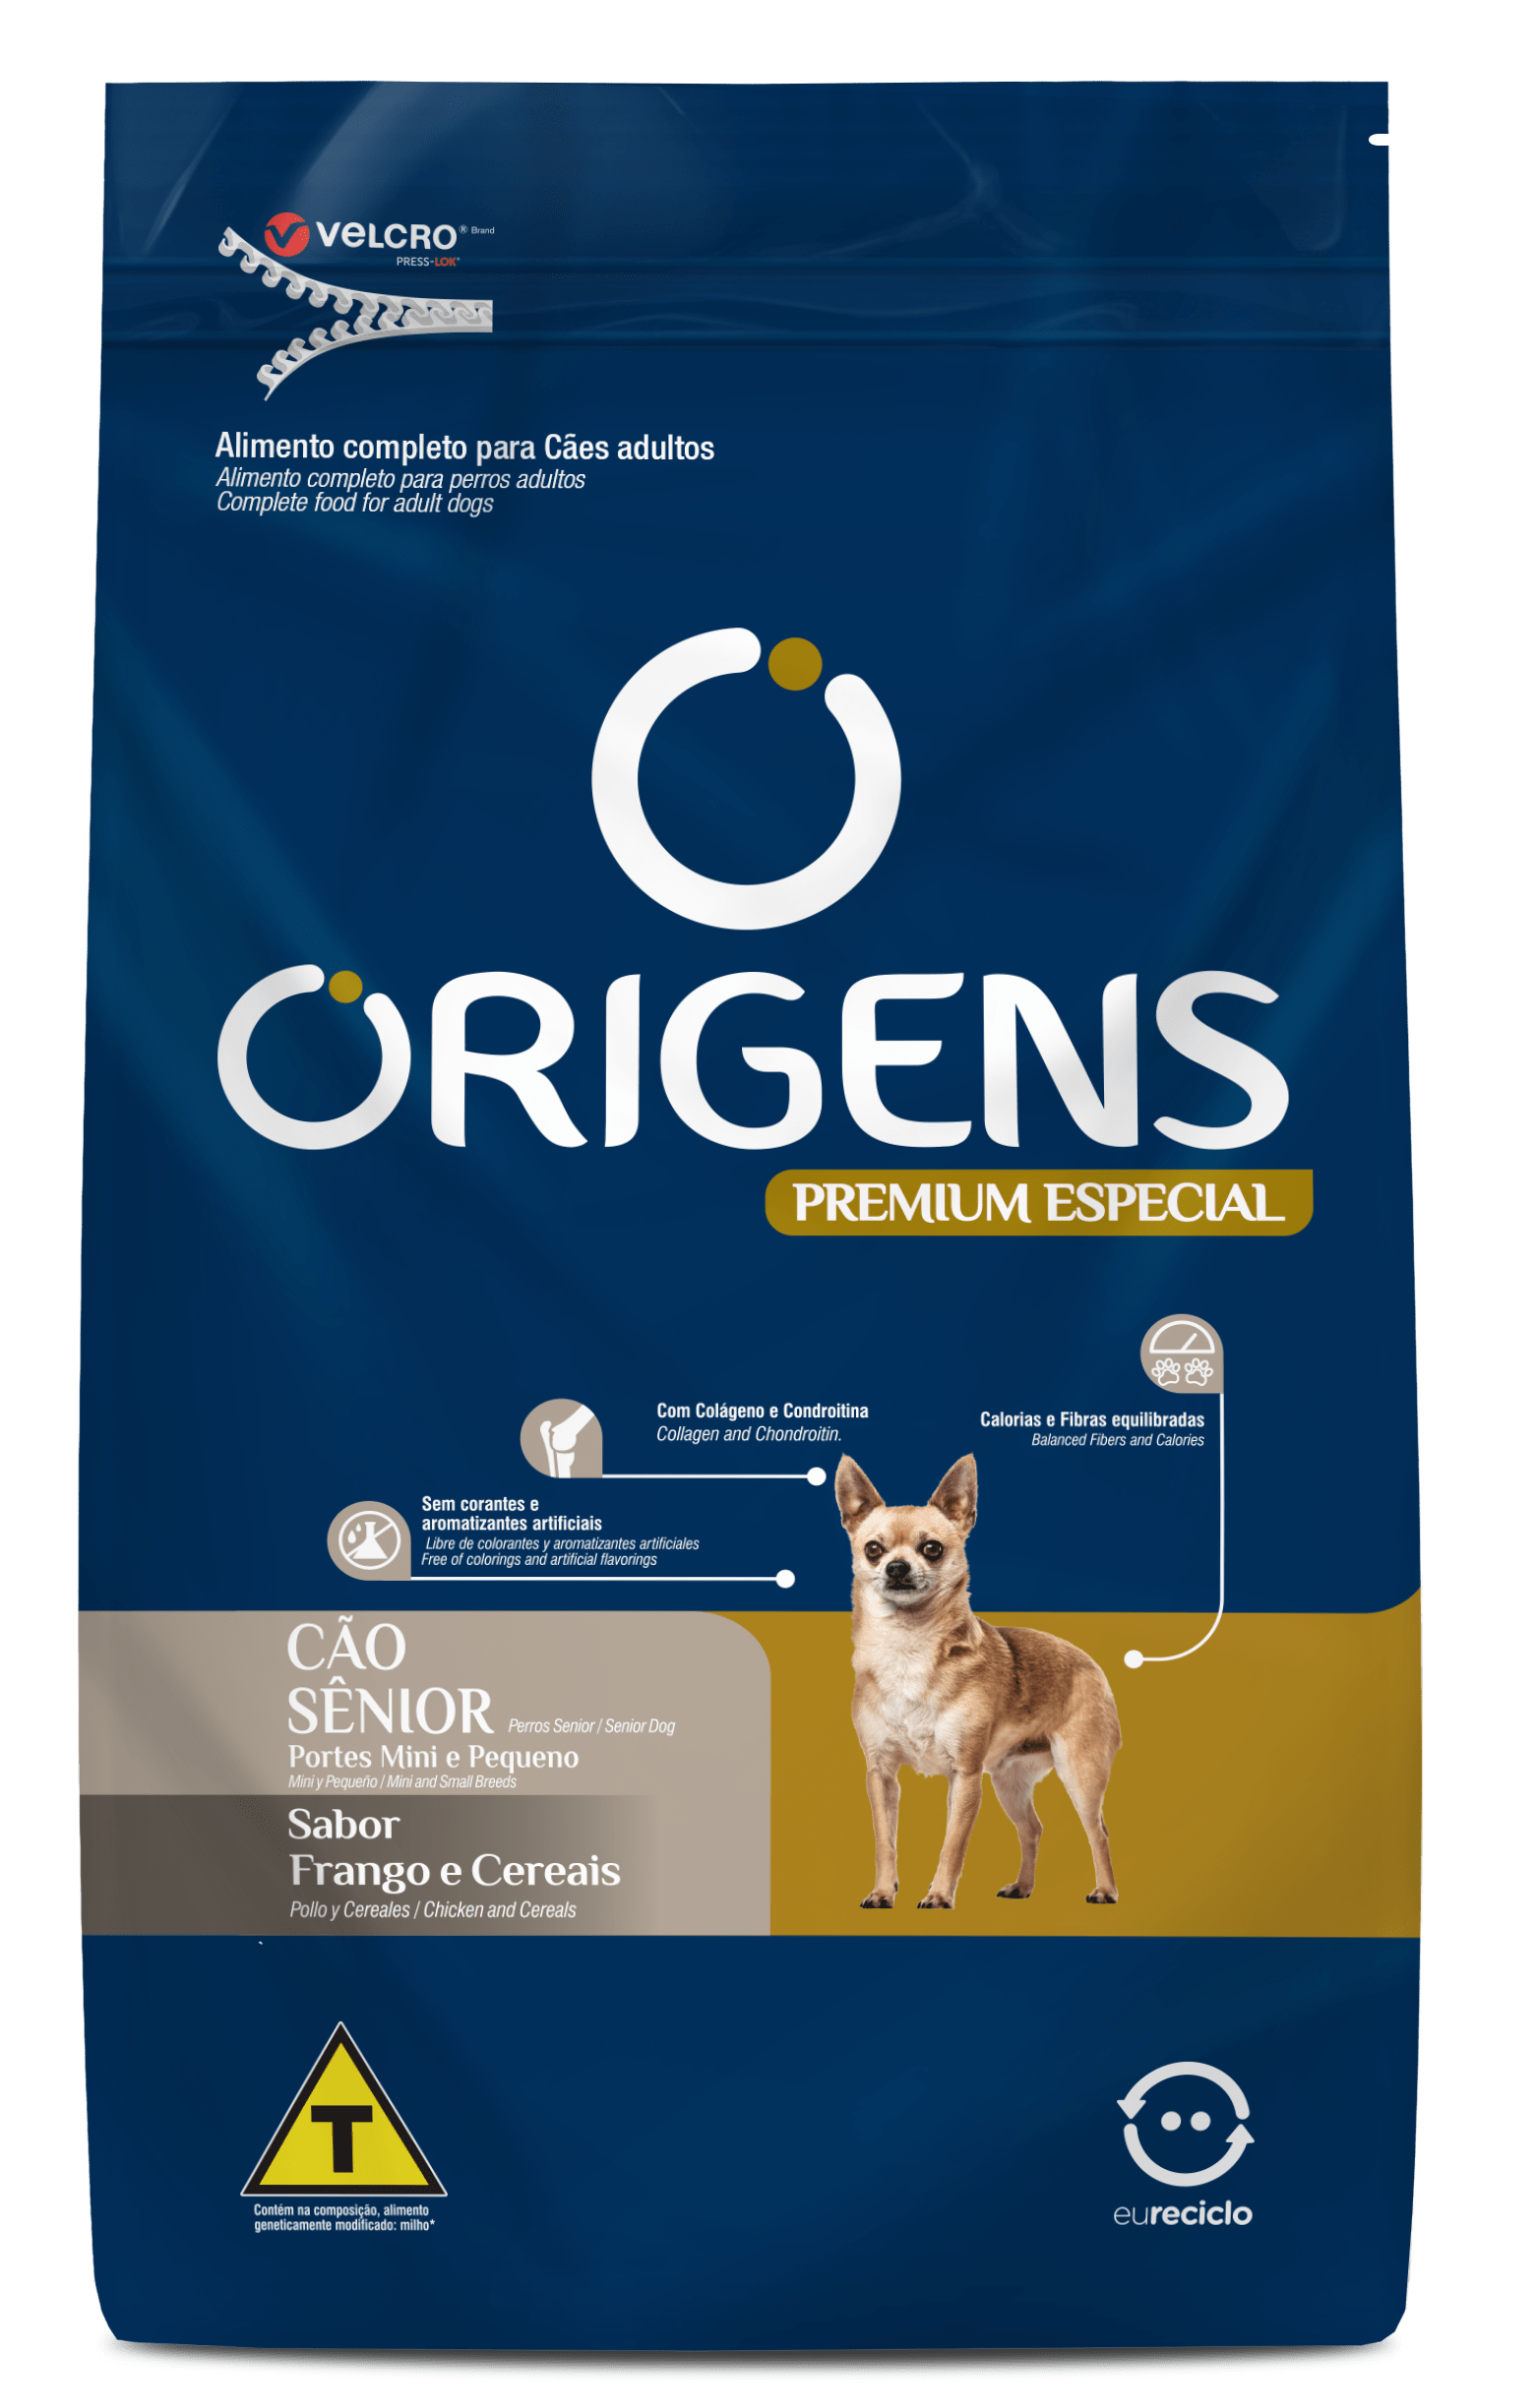 Origens Premium Especial Senior Dogs Mini and Small Breeds Chicken and Cereals Flavors